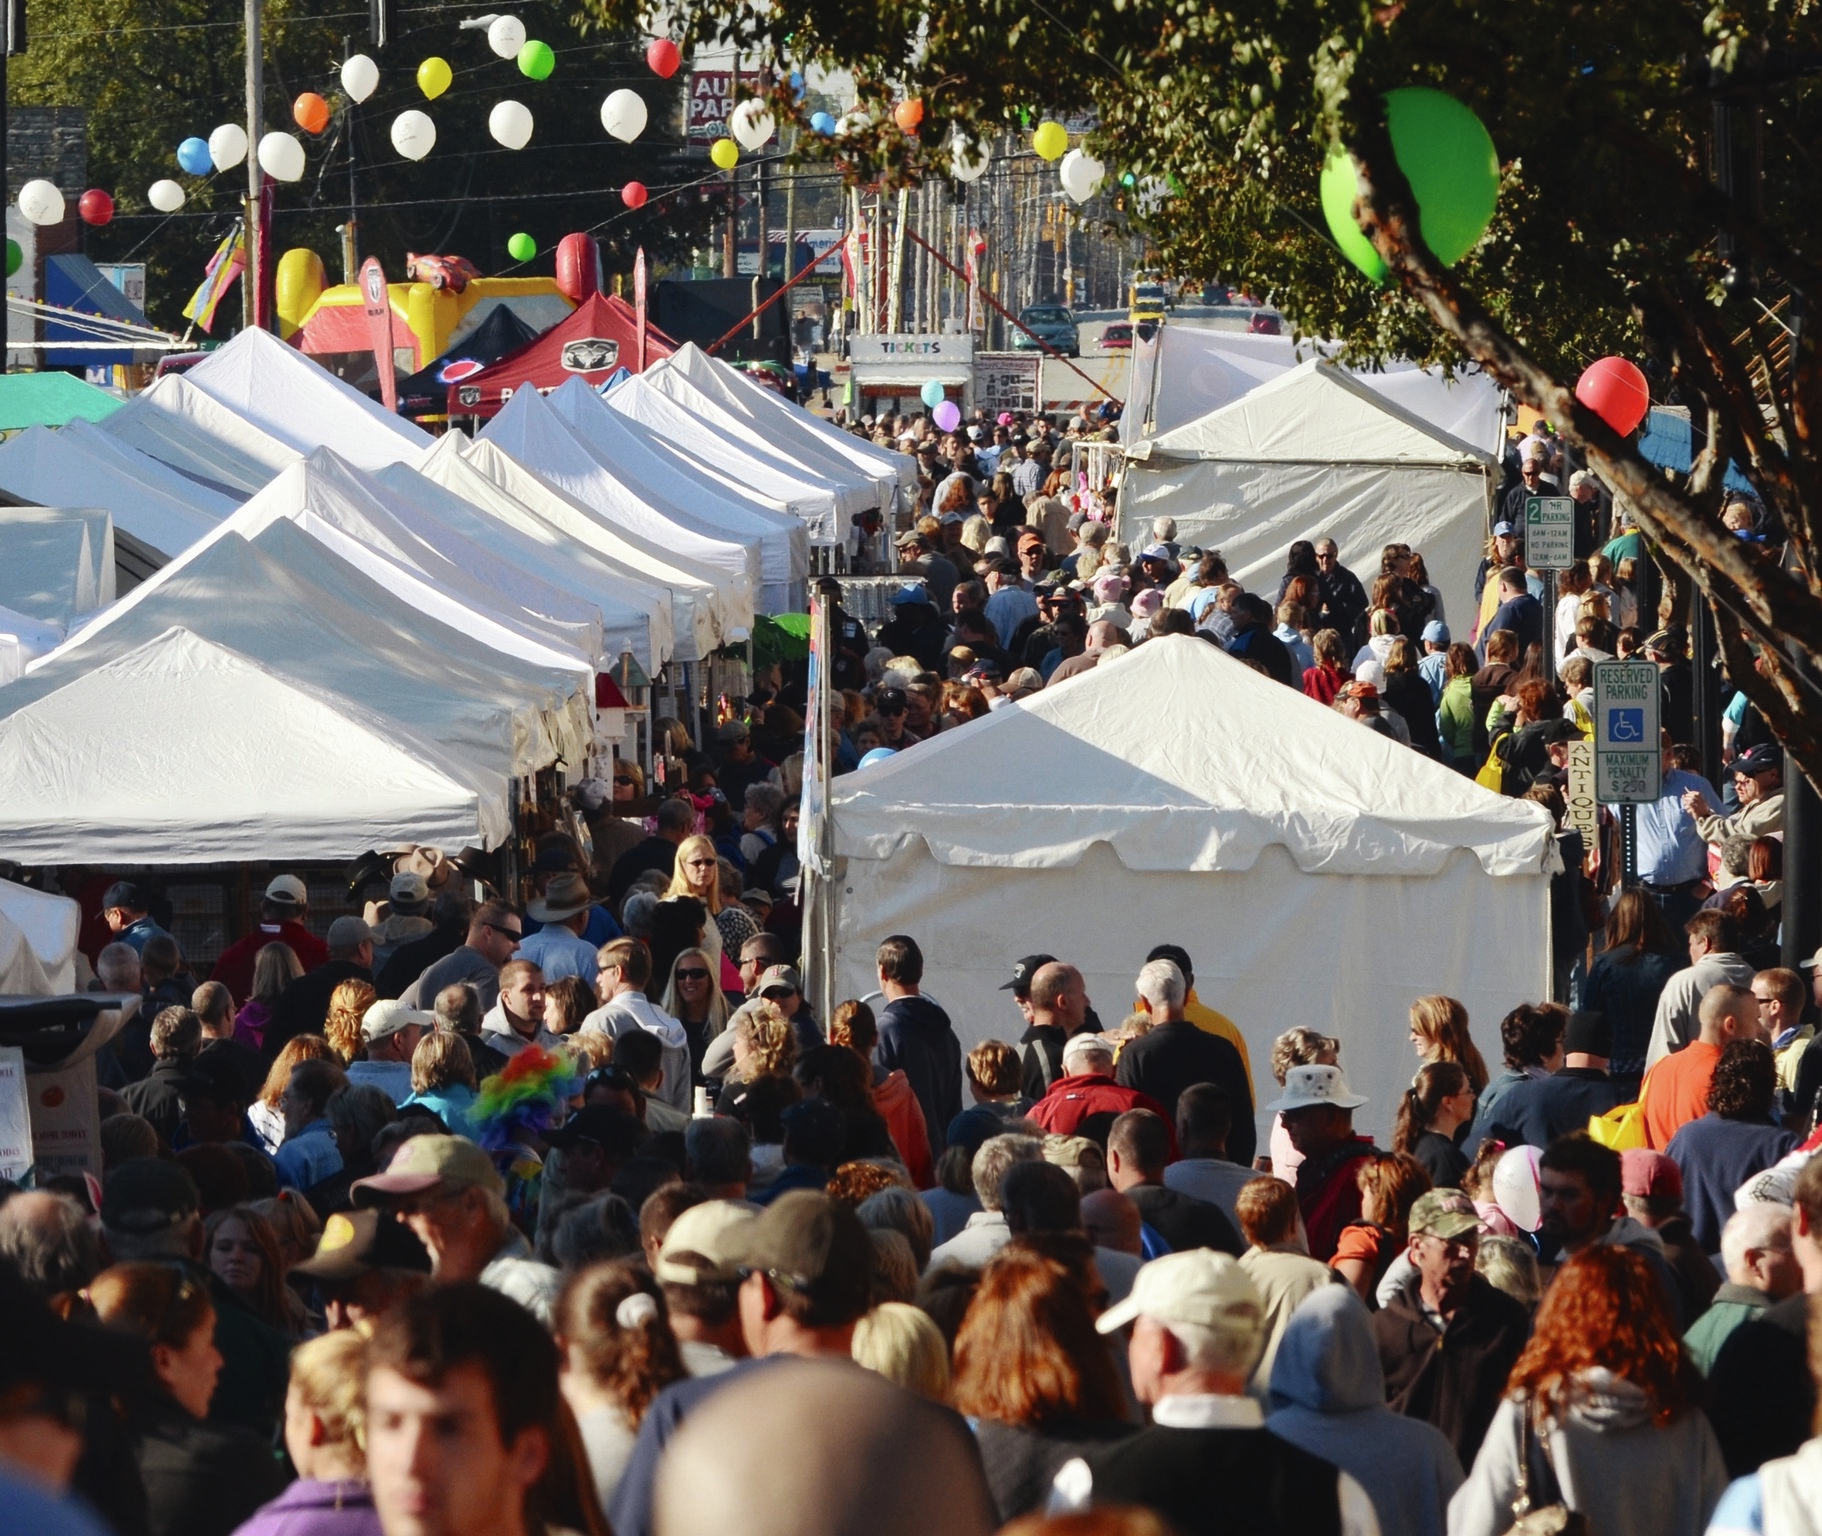 The Lexington Barbecue Festival, October 22 in Lexington, North Carolina, features craft and food vendors, rides, family-friendly activities, live music and food.  Courtesy of Lexington Barbecue Festival